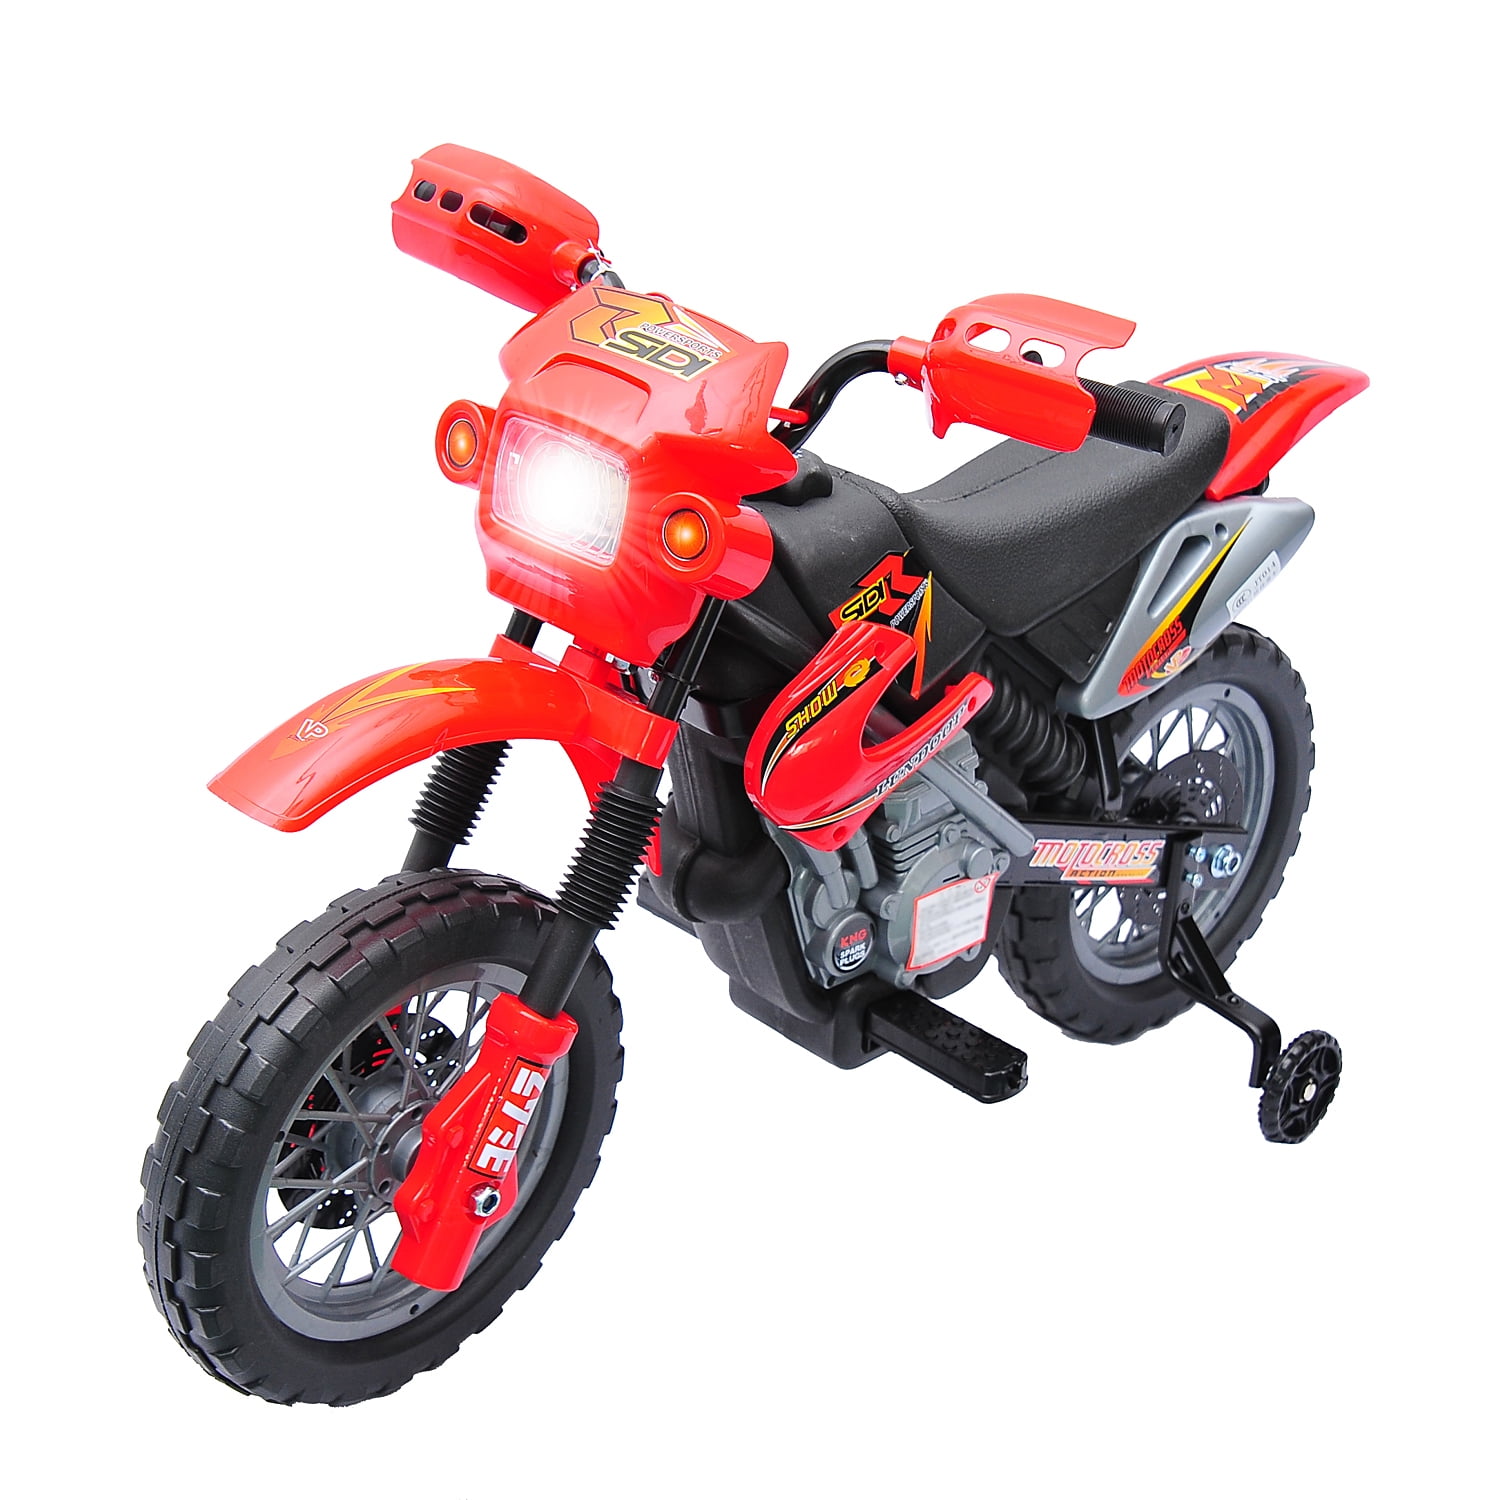 Kids Police Electric Bike Childs Ride On Buggy Motorbike New RED FINAL DISCOUNT! 